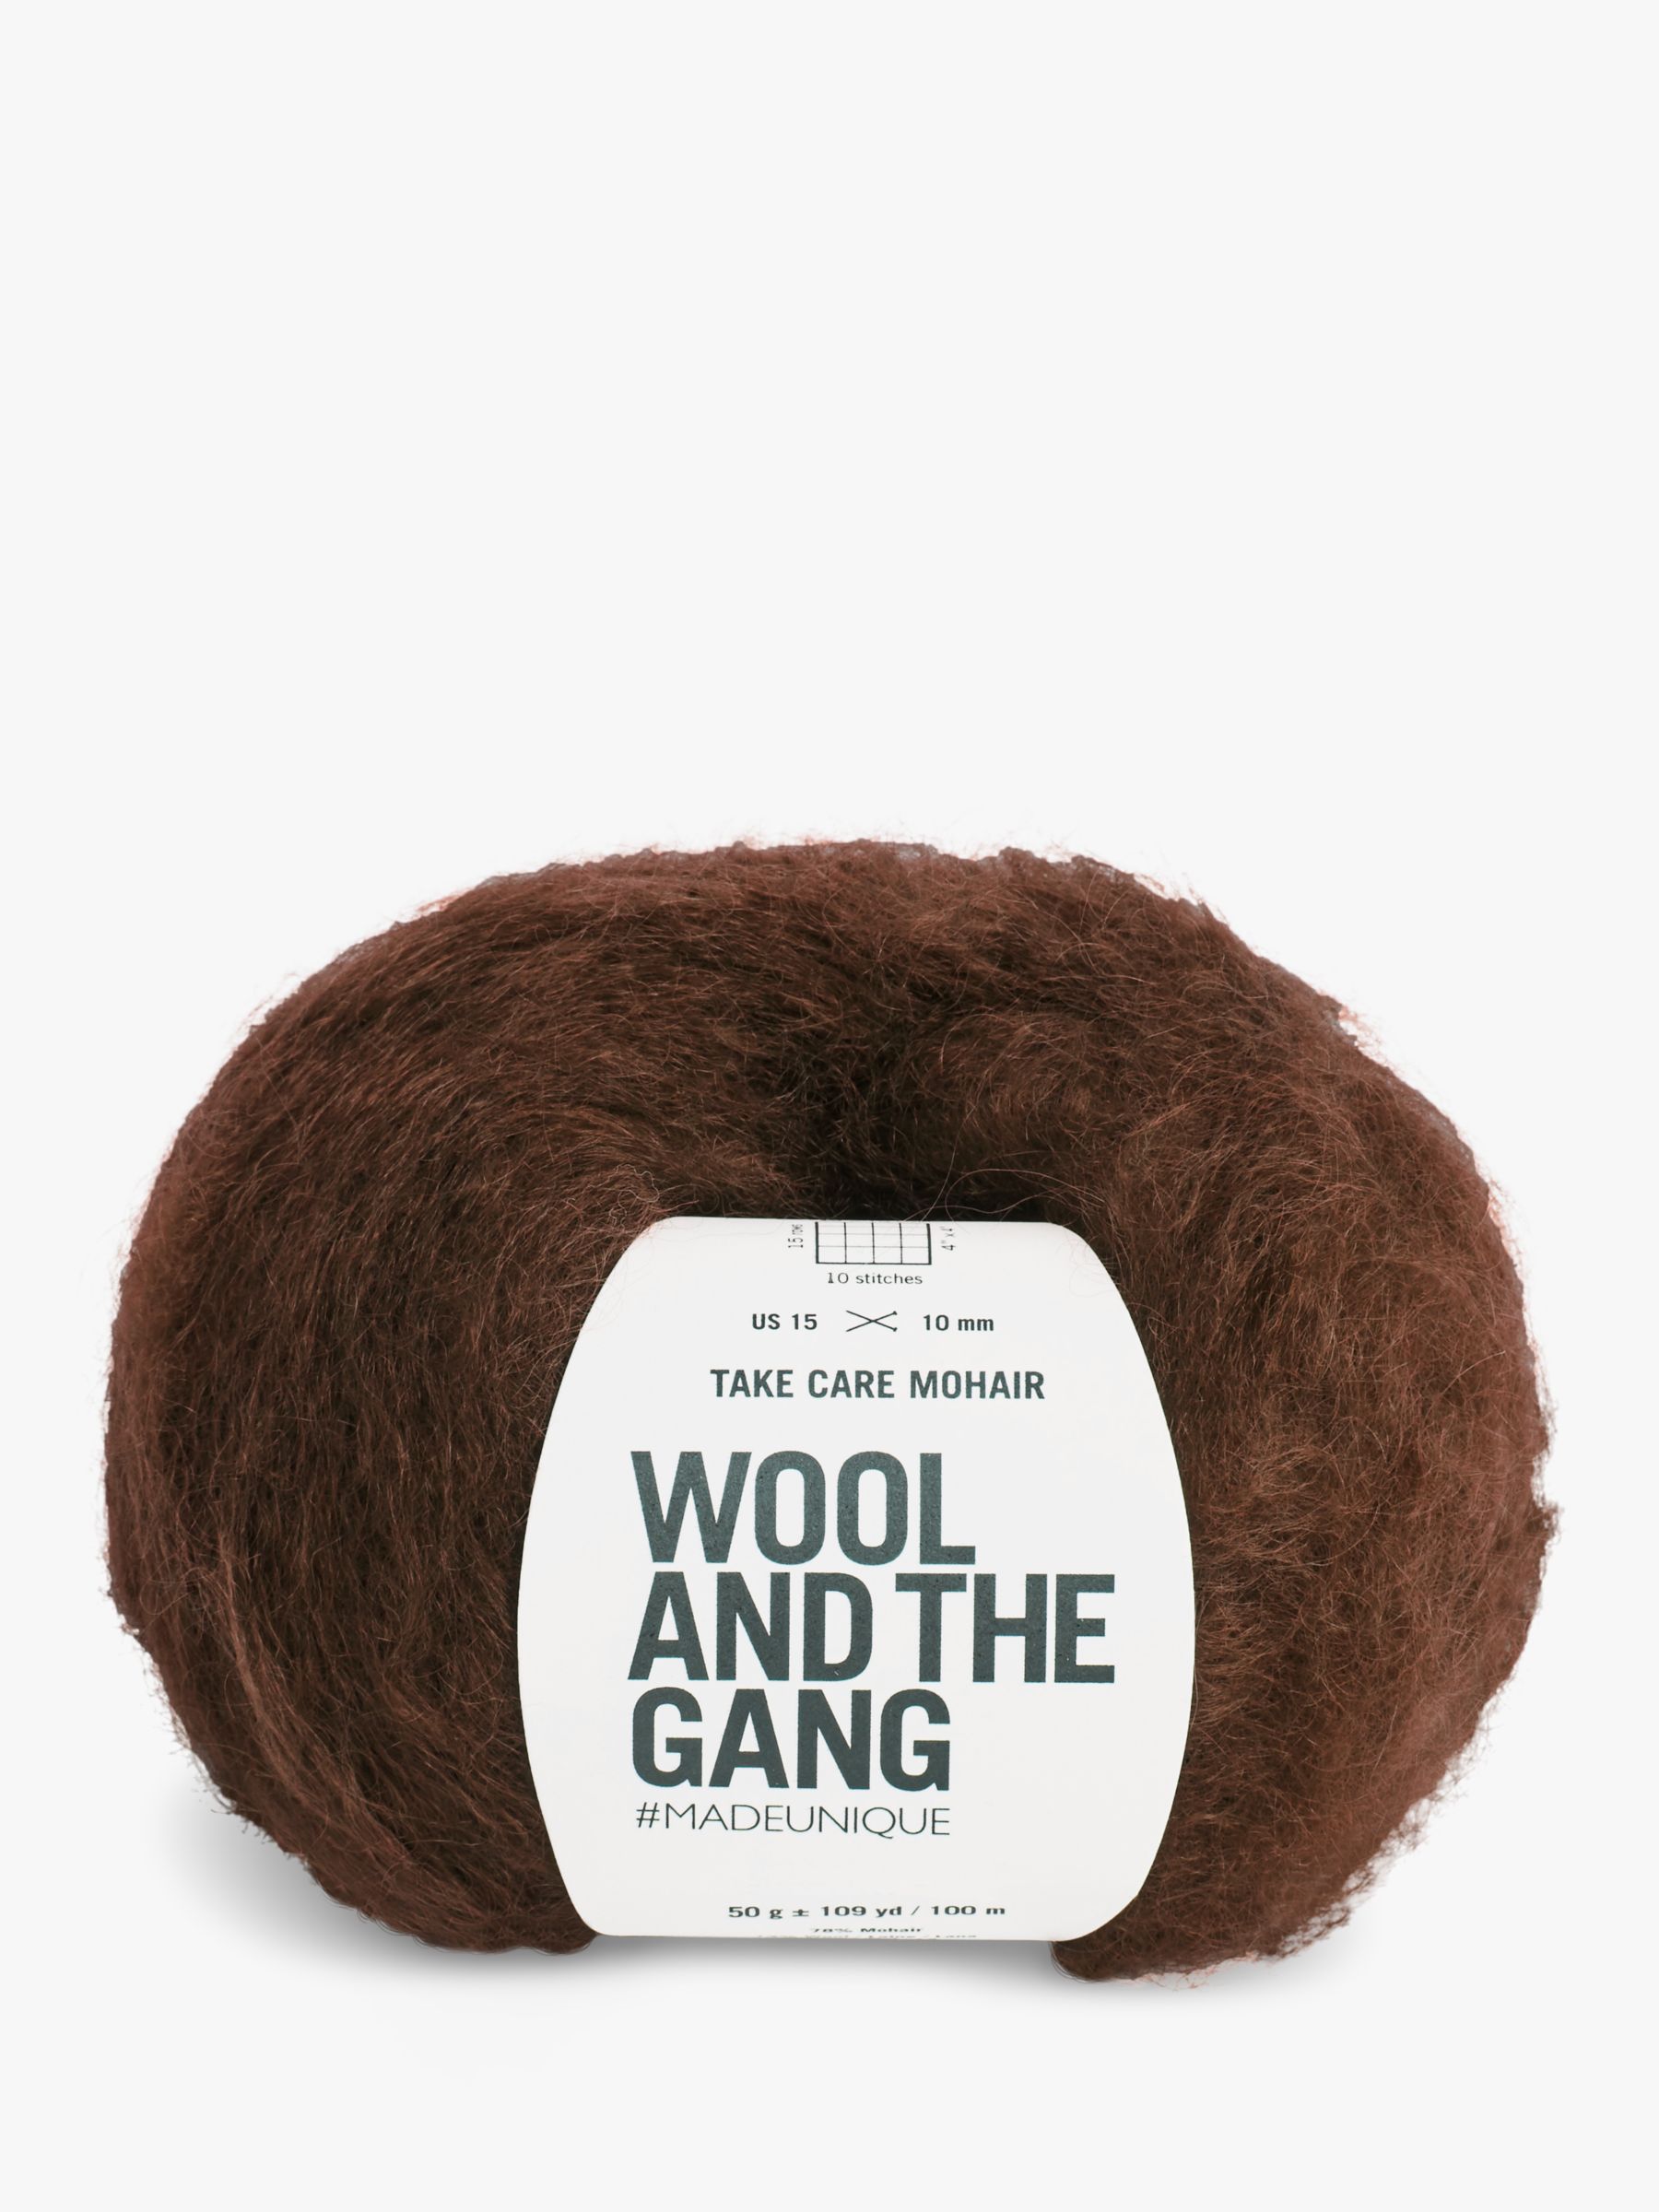 Wool and the Gang